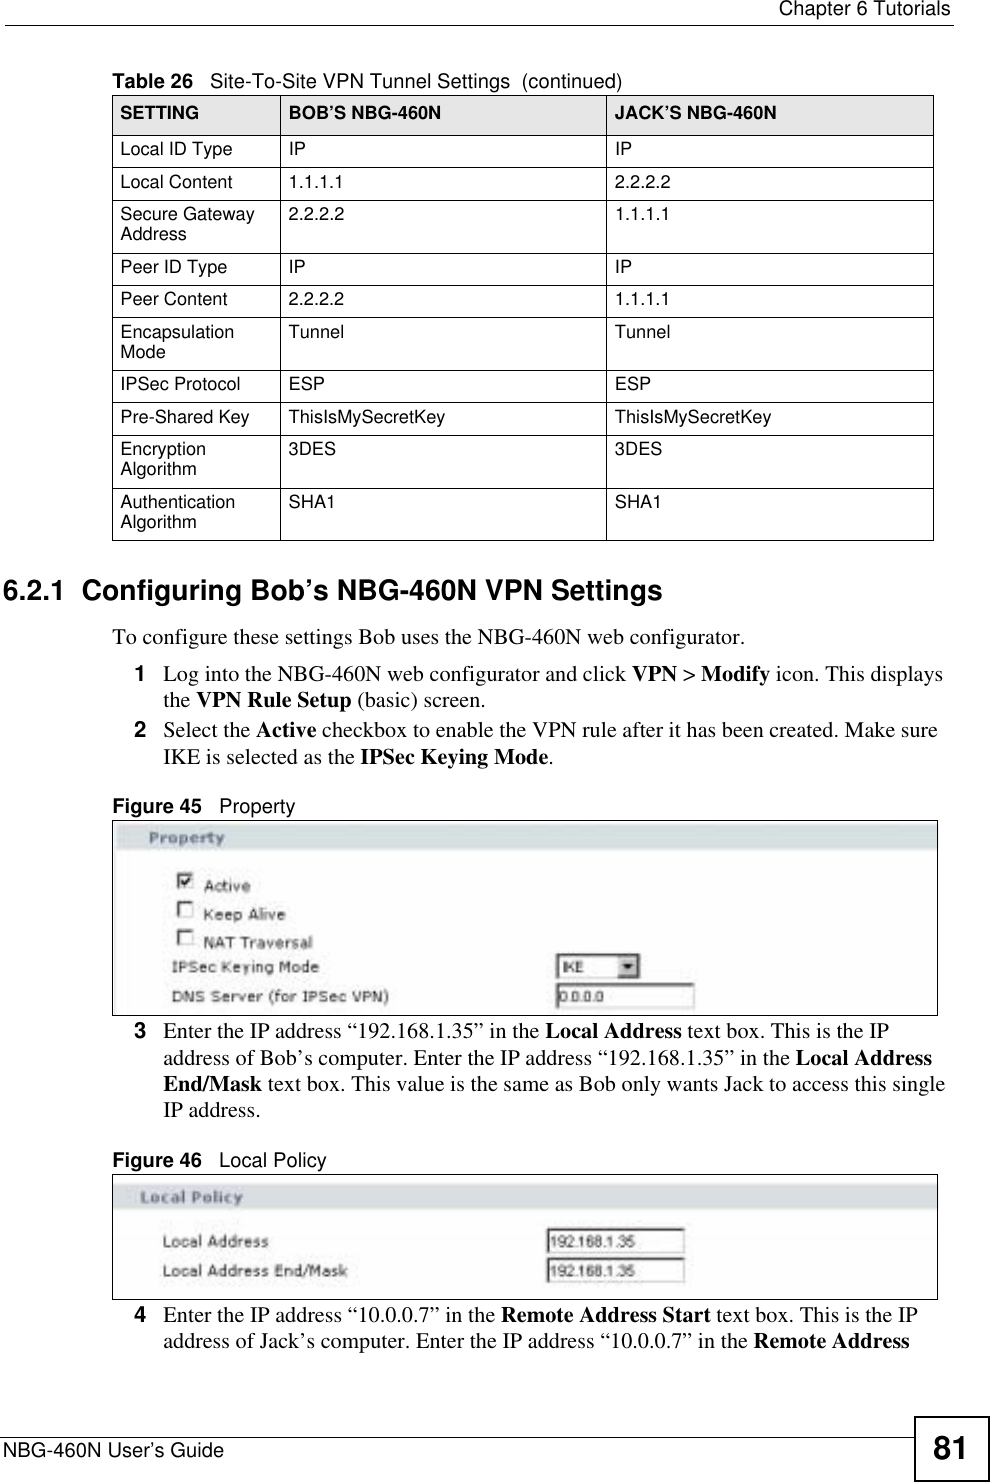  Chapter 6 TutorialsNBG-460N User’s Guide 816.2.1  Configuring Bob’s NBG-460N VPN SettingsTo configure these settings Bob uses the NBG-460N web configurator.1Log into the NBG-460N web configurator and click VPN &gt; Modify icon. This displays the VPN Rule Setup (basic) screen.2Select the Active checkbox to enable the VPN rule after it has been created. Make sure IKE is selected as the IPSec Keying Mode.Figure 45   Property3Enter the IP address “192.168.1.35” in the Local Address text box. This is the IP address of Bob’s computer. Enter the IP address “192.168.1.35” in the Local Address End/Mask text box. This value is the same as Bob only wants Jack to access this single IP address.Figure 46   Local Policy4Enter the IP address “10.0.0.7” in the Remote Address Start text box. This is the IP address of Jack’s computer. Enter the IP address “10.0.0.7” in the Remote Address Local ID Type IP IPLocal Content 1.1.1.1 2.2.2.2Secure Gateway Address 2.2.2.2 1.1.1.1Peer ID Type IP IPPeer Content 2.2.2.2 1.1.1.1Encapsulation Mode Tunnel TunnelIPSec Protocol ESP ESPPre-Shared Key ThisIsMySecretKey ThisIsMySecretKeyEncryption Algorithm 3DES 3DESAuthentication Algorithm SHA1 SHA1Table 26   Site-To-Site VPN Tunnel Settings  (continued)SETTING BOB’S NBG-460N JACK’S NBG-460N